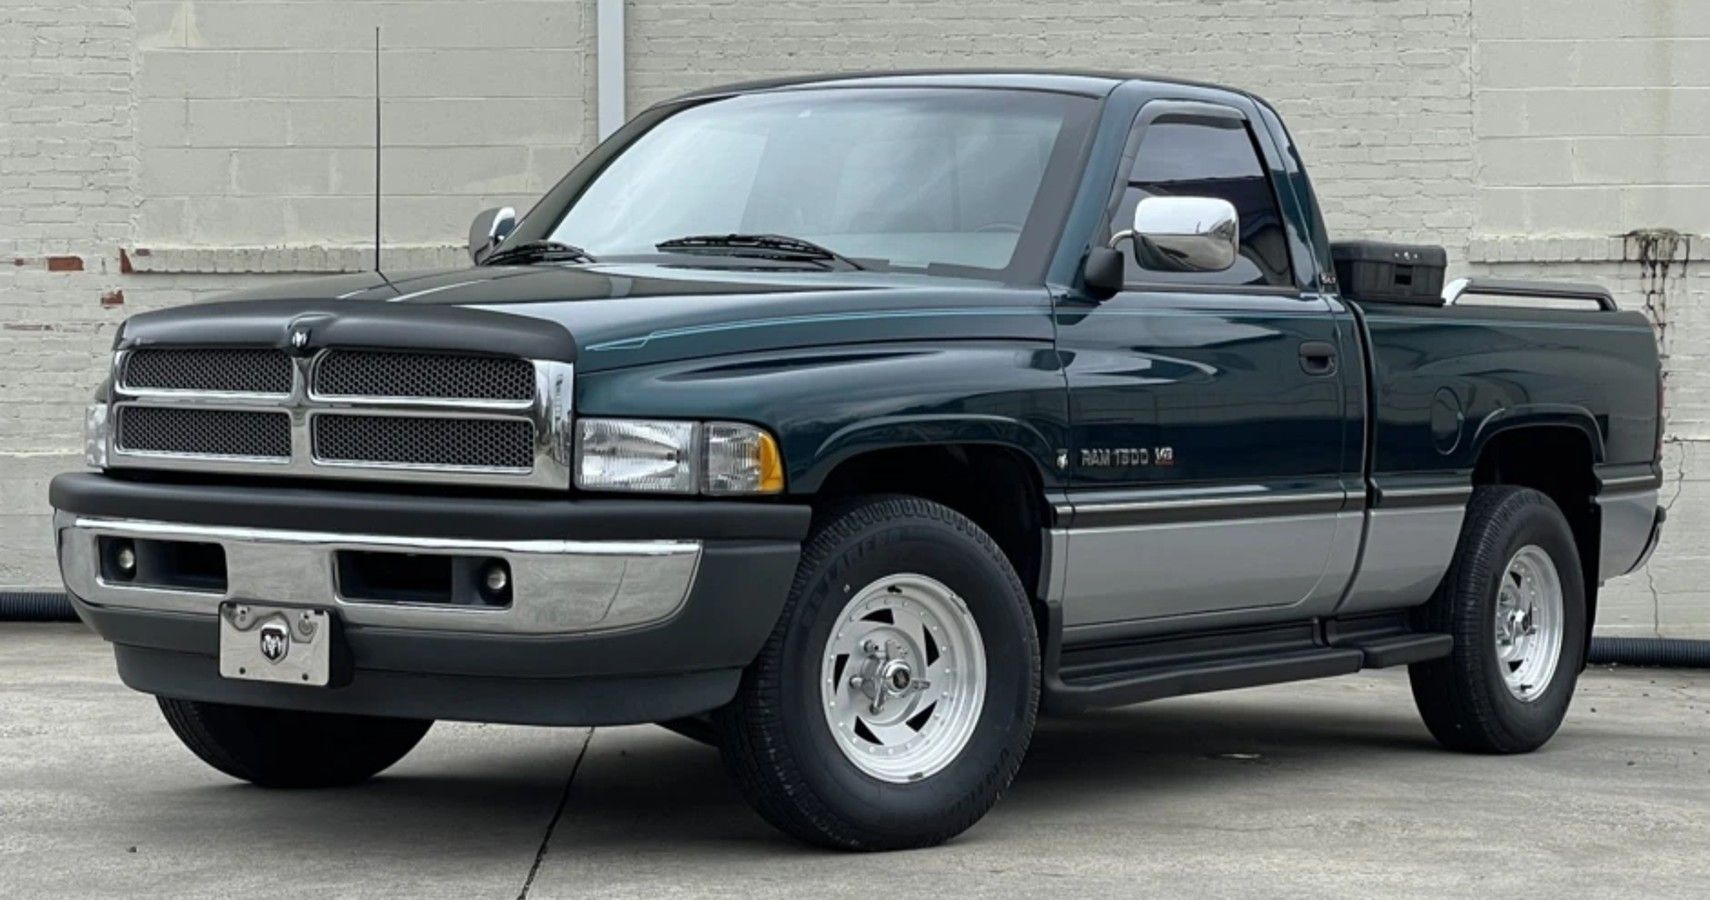 Here's What You Should Know Before You Buy A 2nd-Gen Dodge Ram Pickup